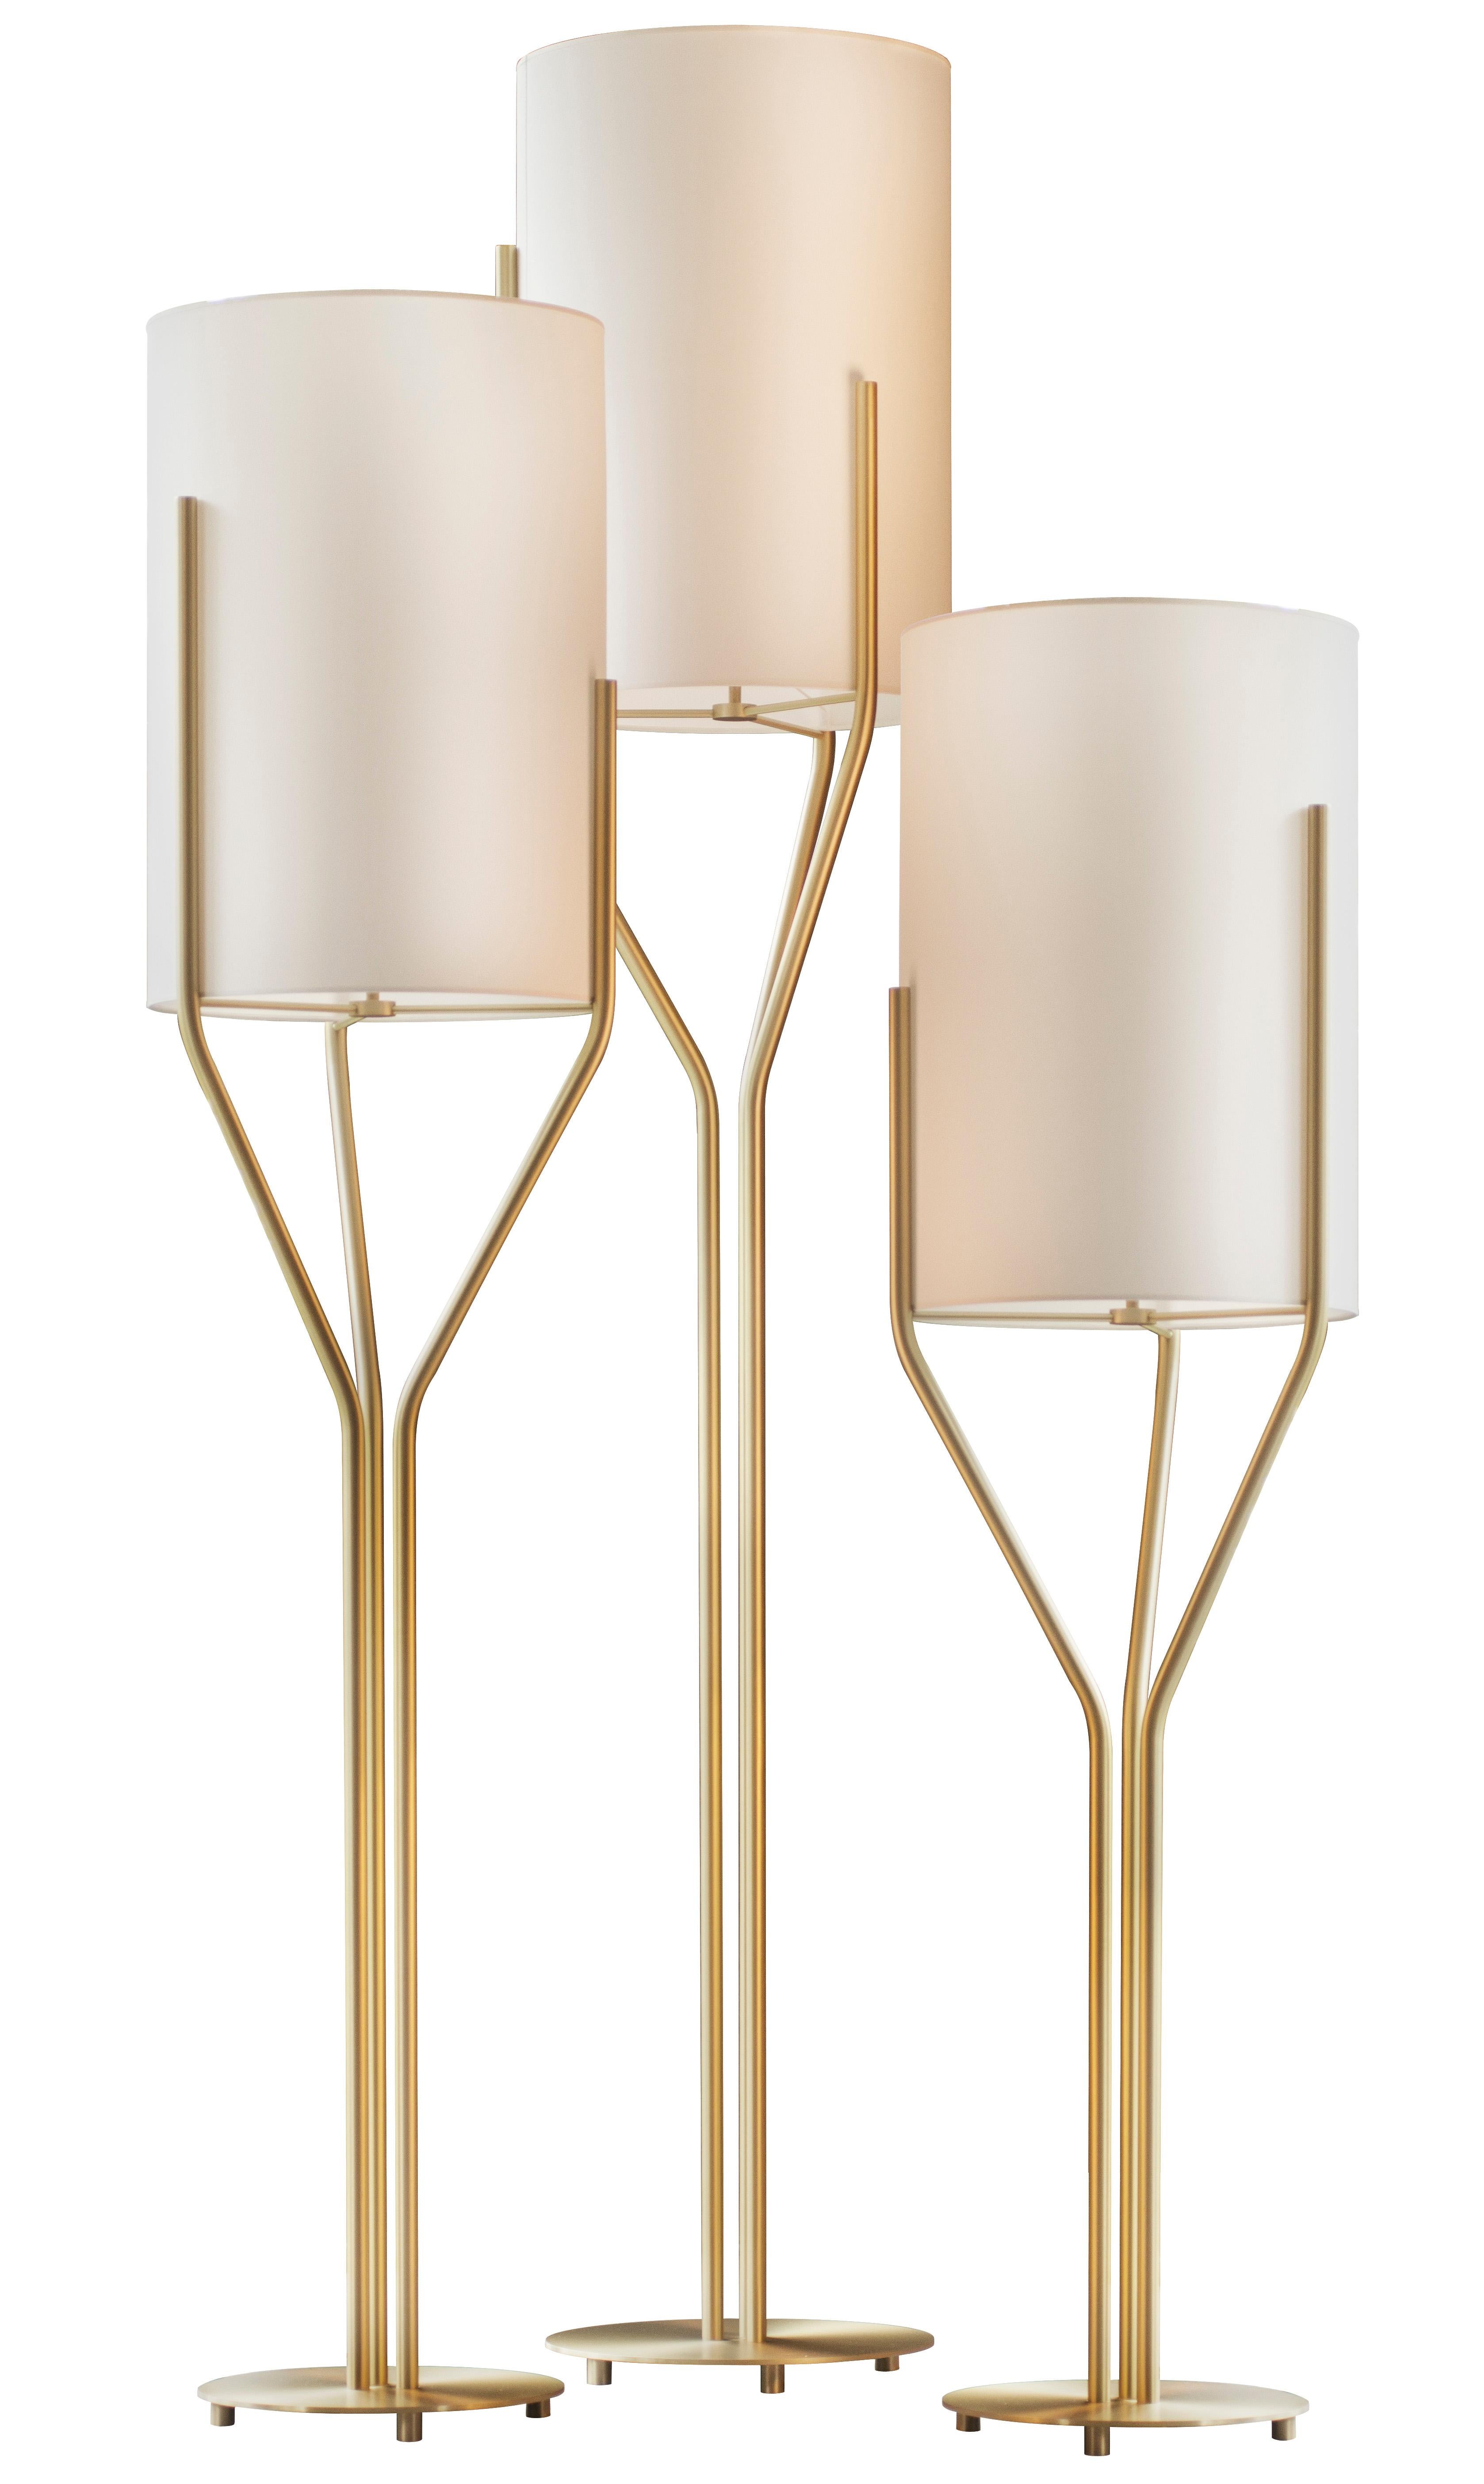 Set of 3 Arborescence Satin brass floor lamps by Hervé Langlais
Dimensions: D40 X H210, D40 x H180, D40 x H150 cm
Materials: Solid Brass, Lampshade Drop Paper® M1, Black textile cable (2m).
Others finishes and dimensions are available.
All our